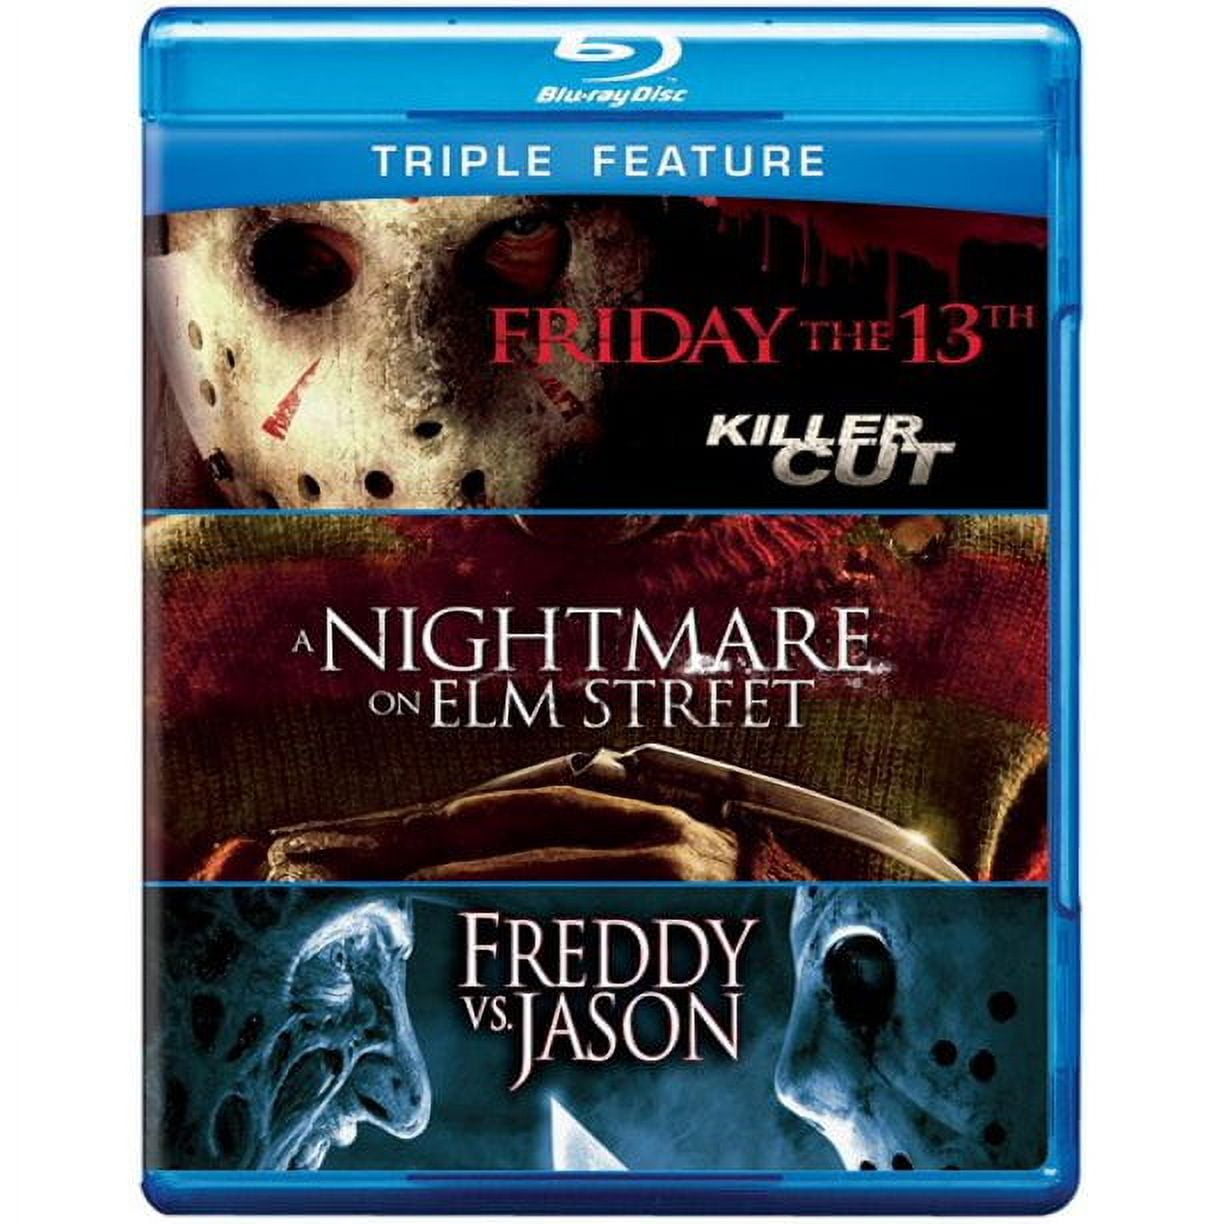 Buy Friday/Next Friday/Friday After Next DVD Triple Feature DVD